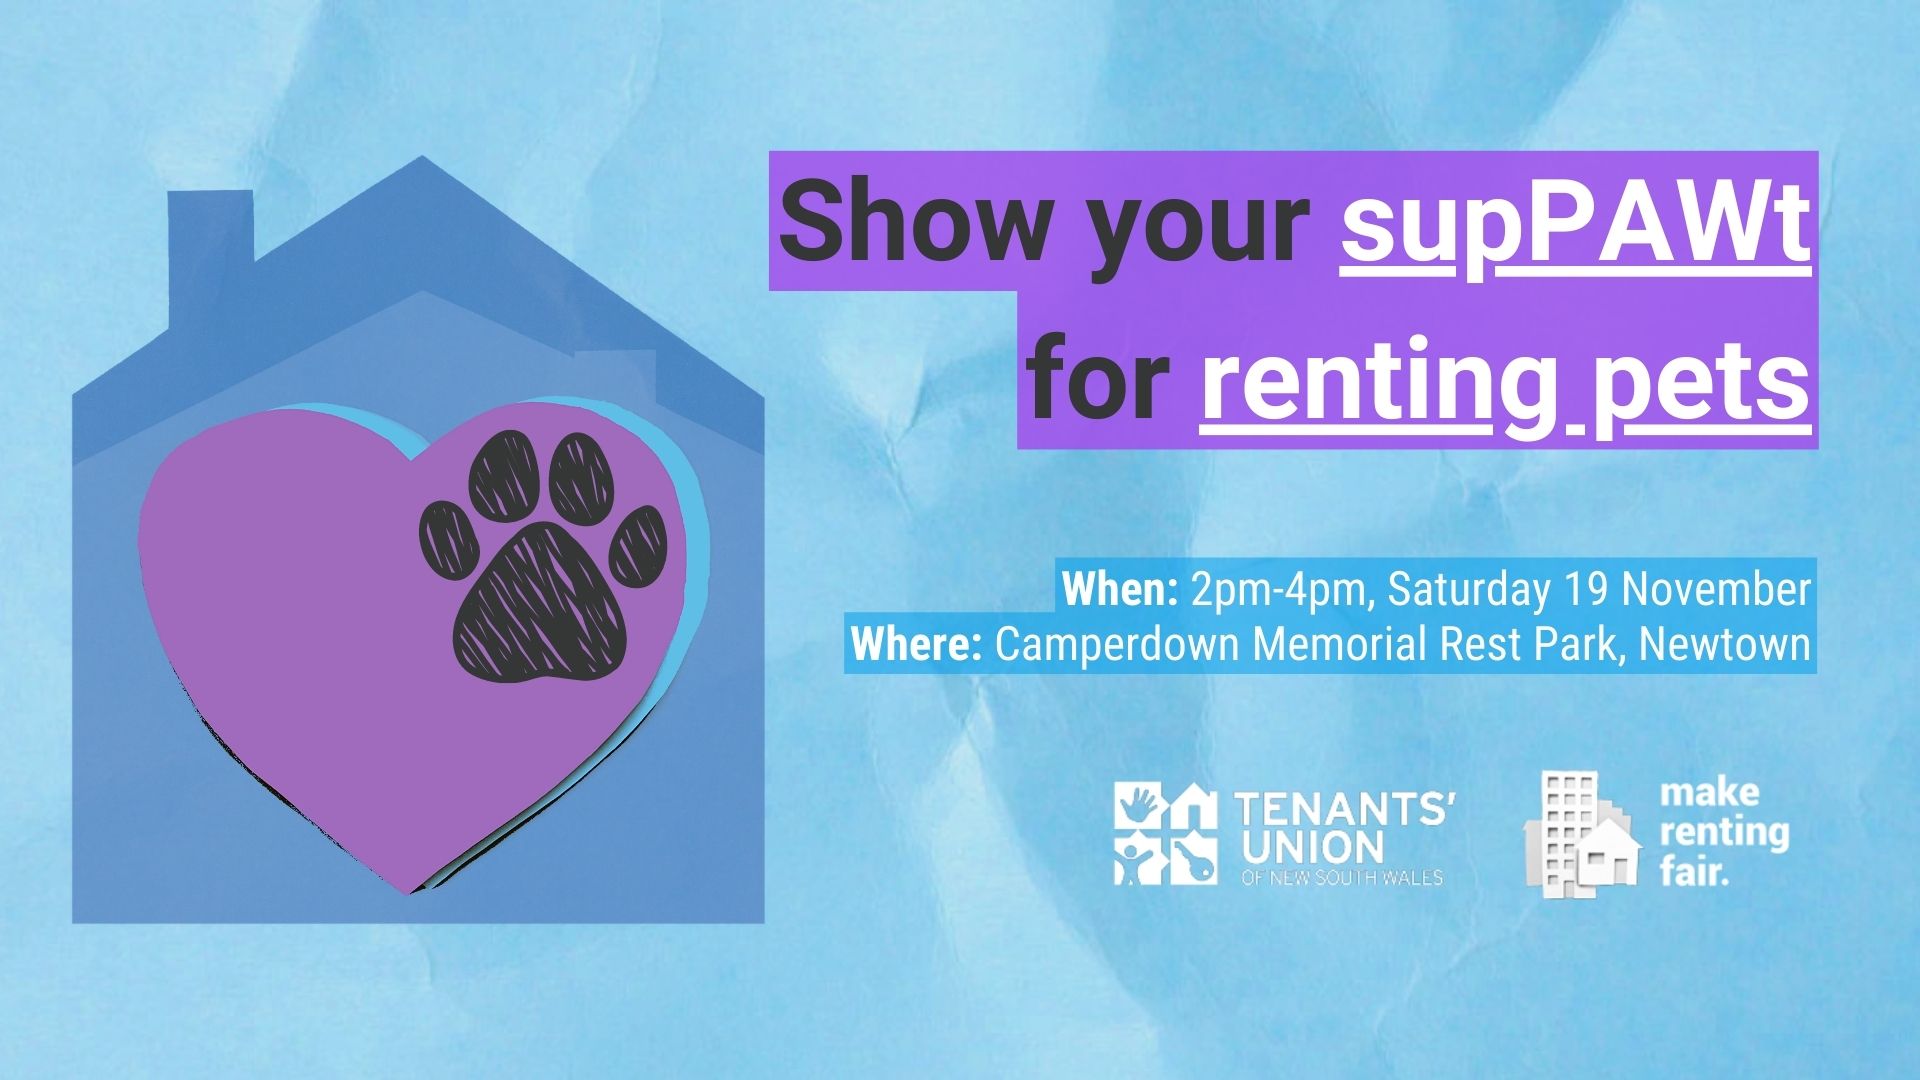 Show your supPAWt for renting pets